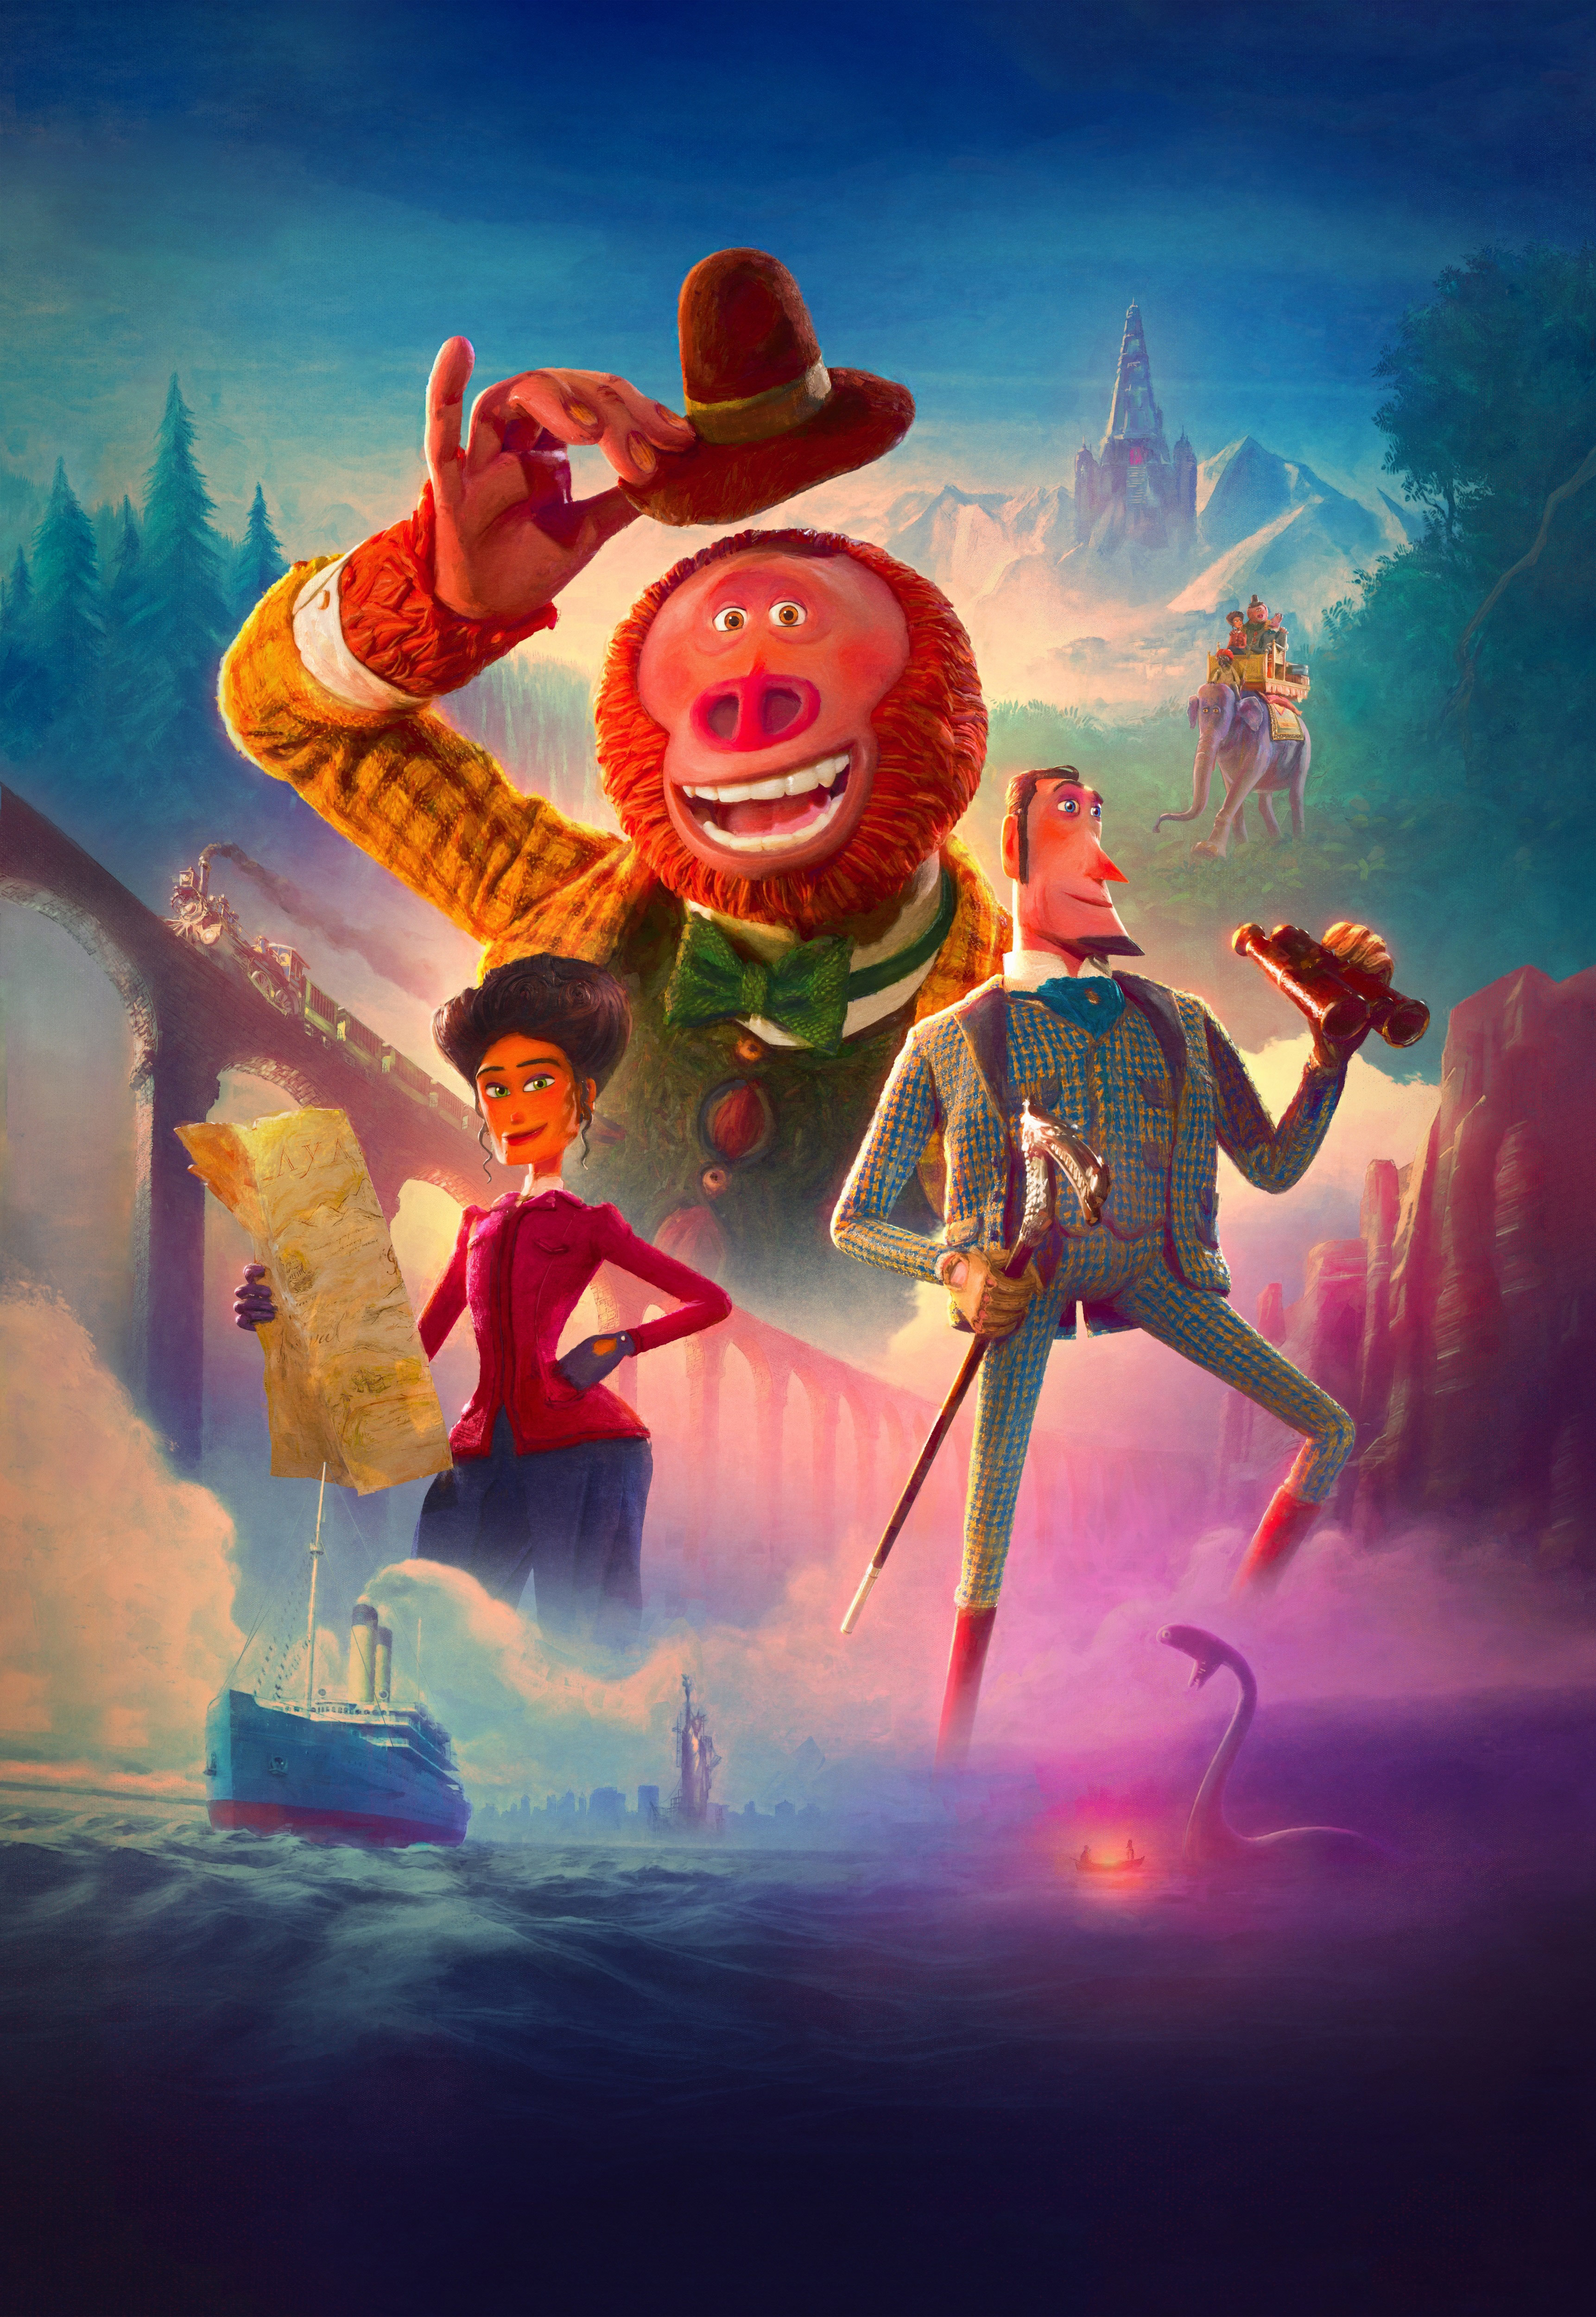 Missing Link 2019 Wallpaper, HD Movies 4K Wallpapers, Images, Photos